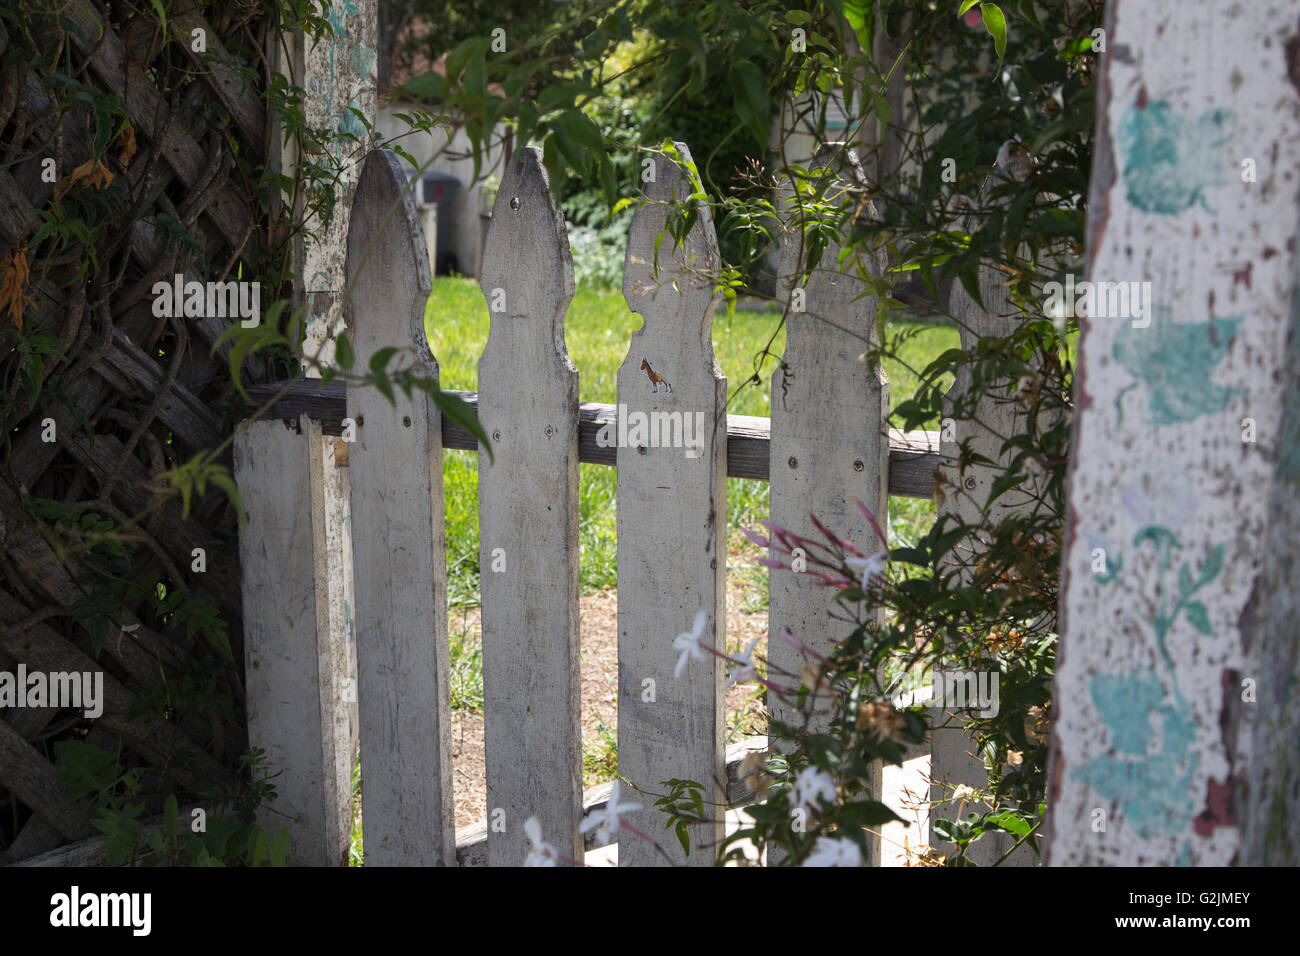 Old white picket fence entrance gate to garden Stock Photo